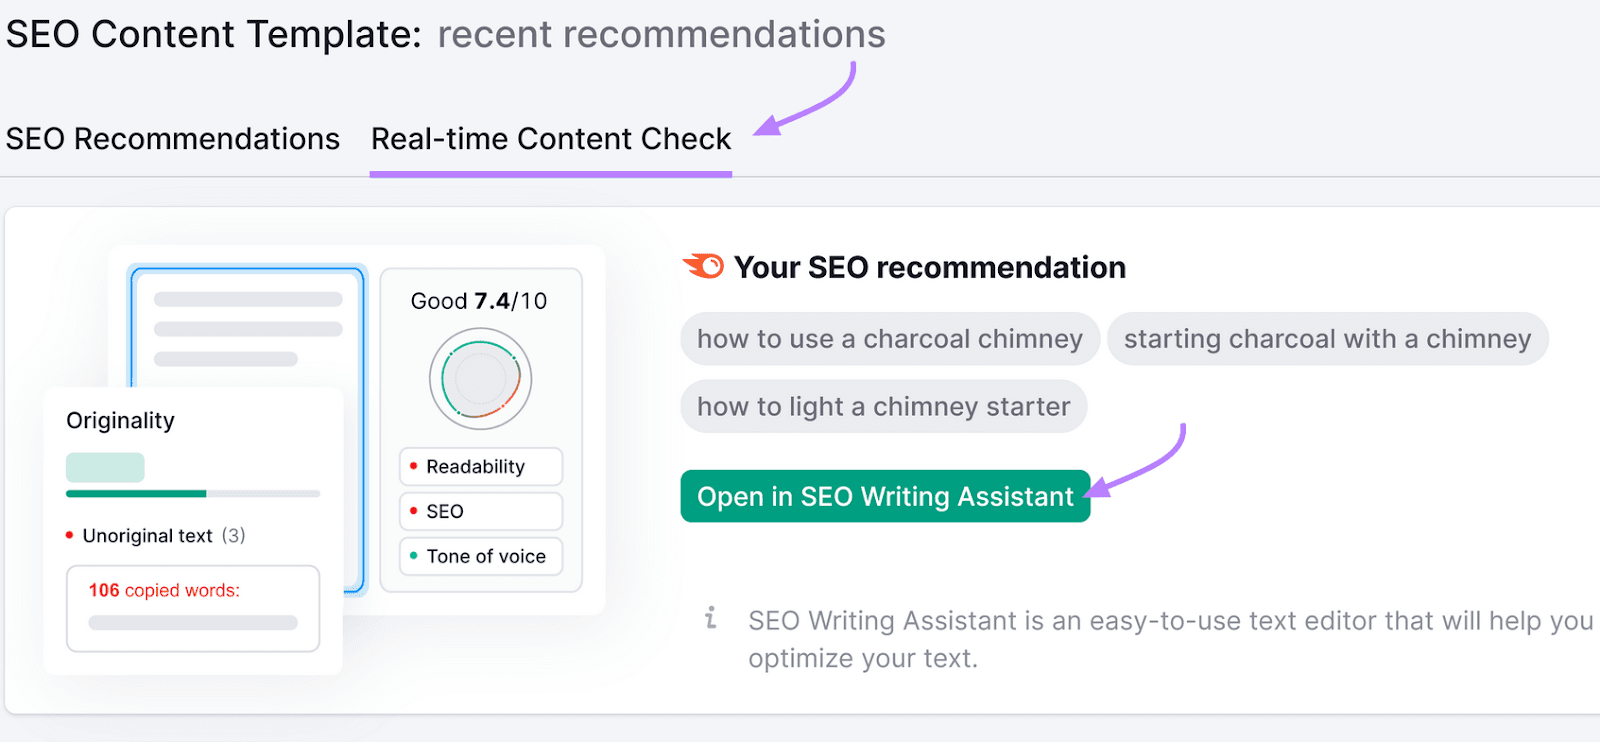 SEO Content Template tool showing a list of SEO recommendations and a green button "Open in SEO Writing Assistant."